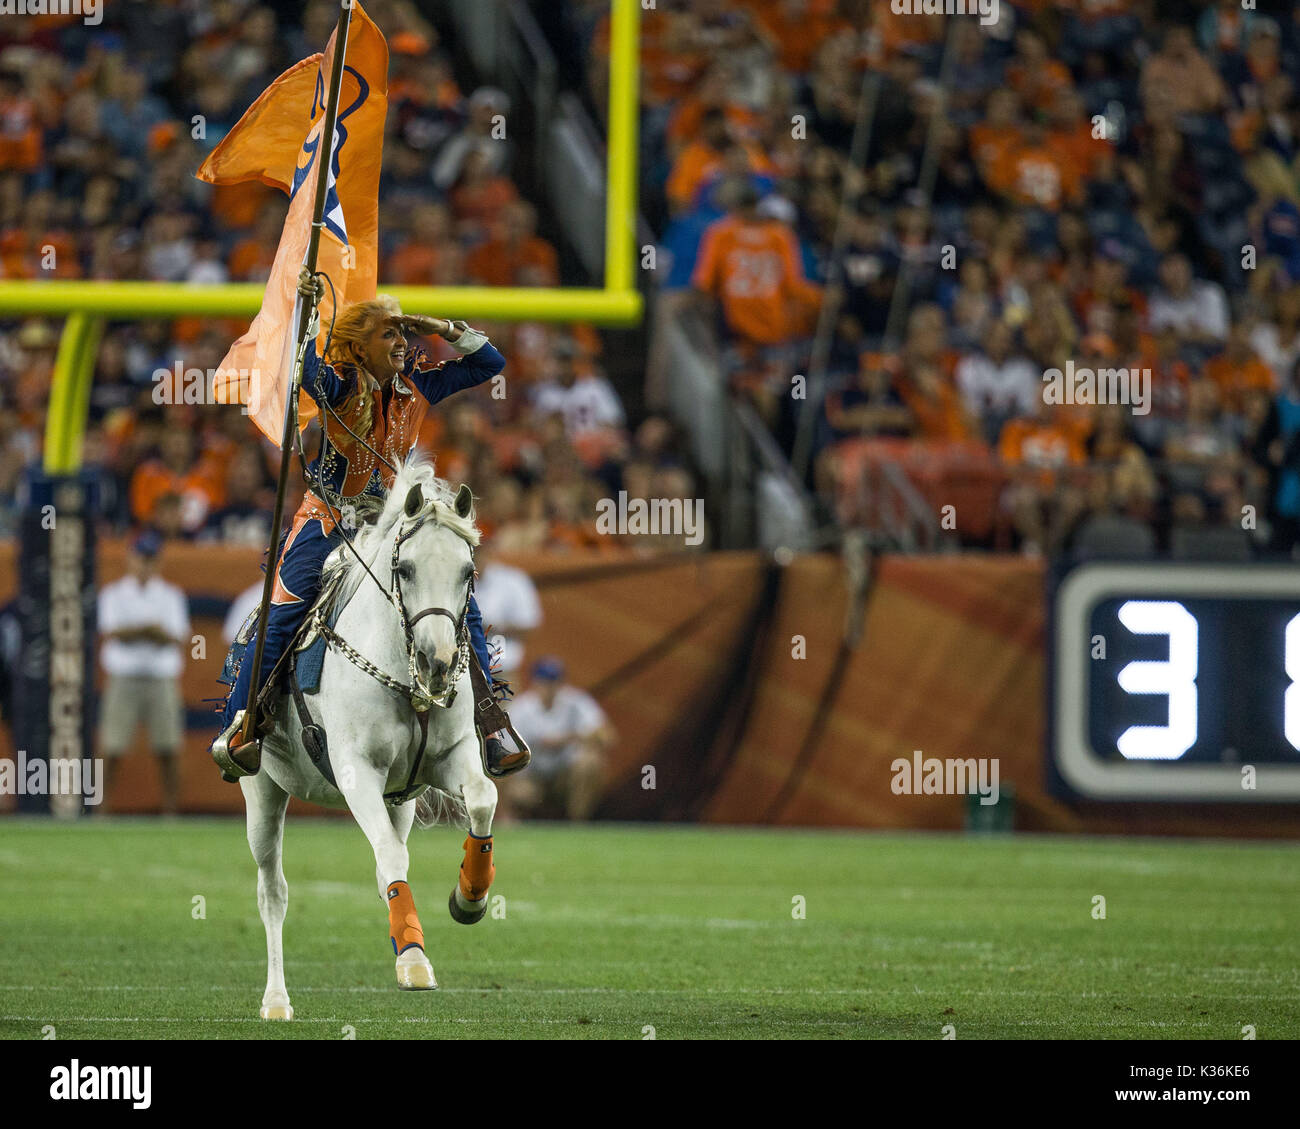 August 31, 2017: Denver Broncos mascot Thunder takes the field after the Broncos scored a touchdown during the second quarter of an NFL preseason matchup between the Arizona Cardinals and the Denver Broncos at Sports Authority Field at Mile High Stadium Denver CO, Scott D Stivason/Cal Sport Media Stock Photo